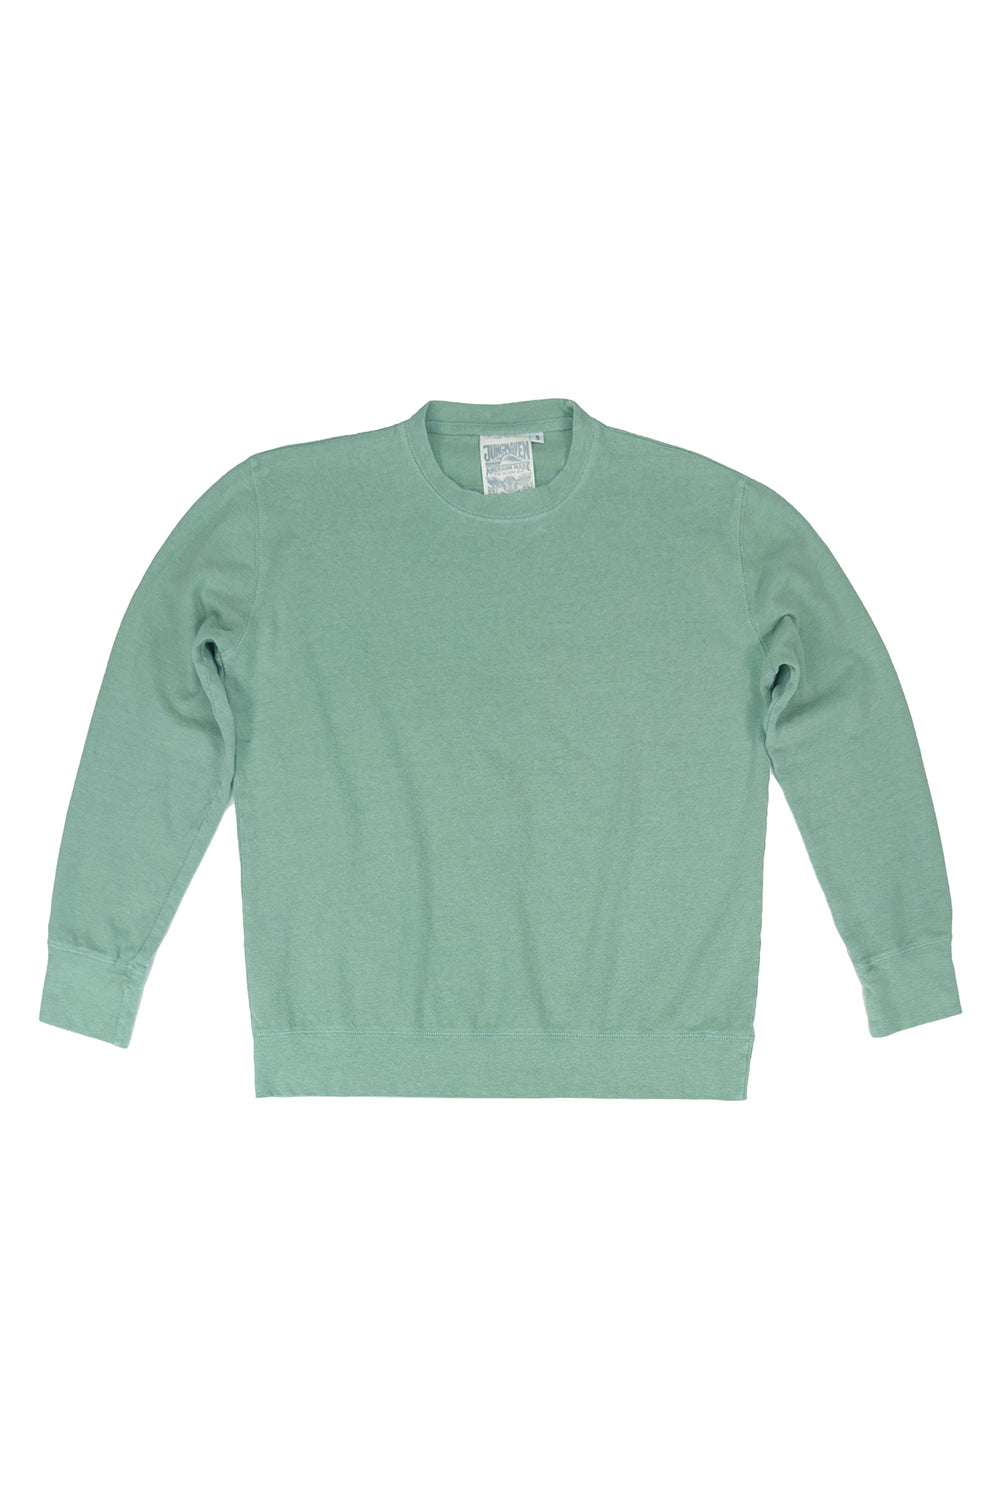 California Pullover | Jungmaven Hemp Clothing & Accessories / Color: Sage Green